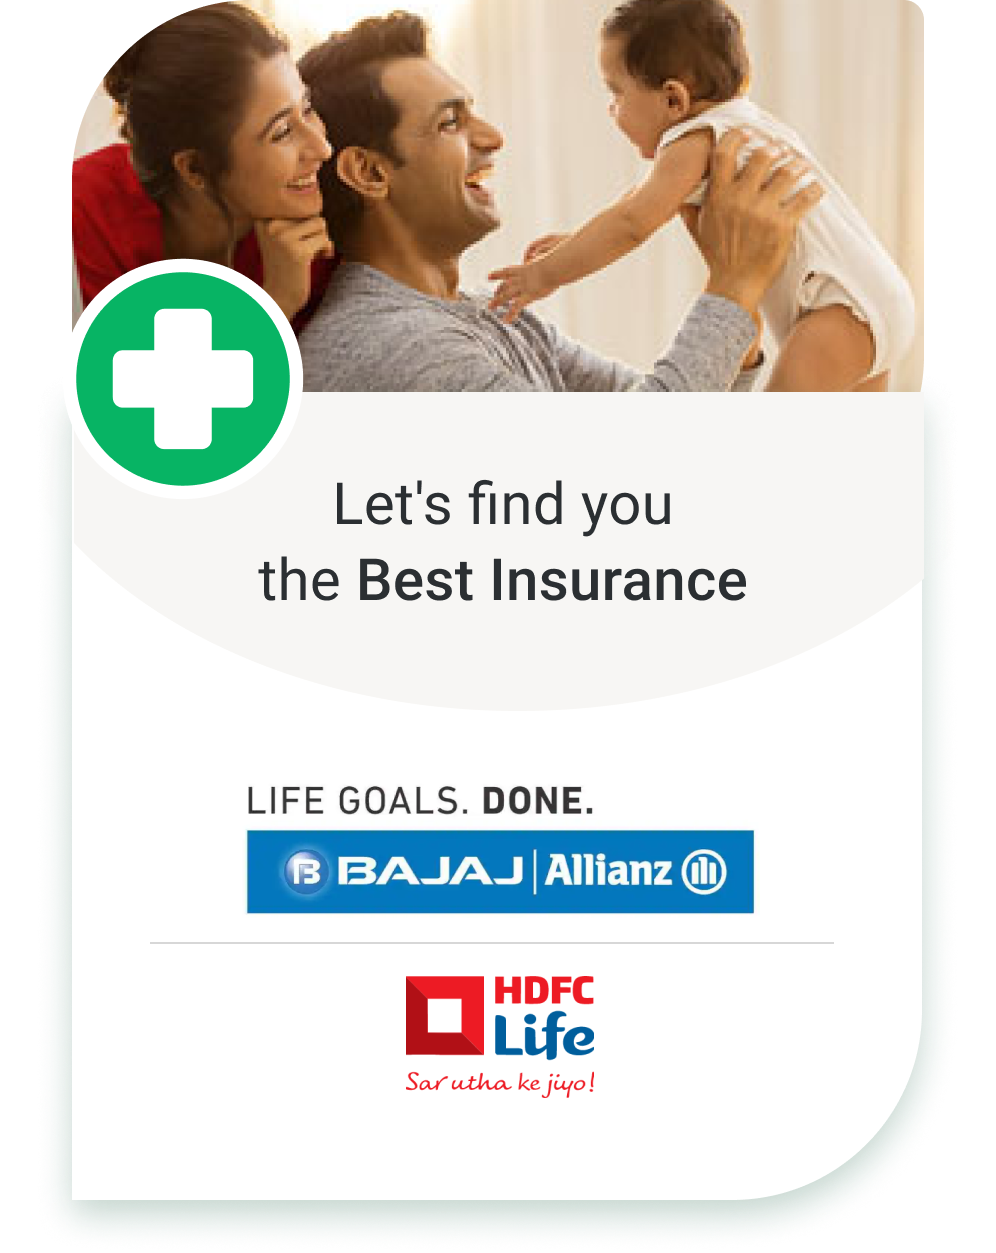 religare travel insurance from india to uk